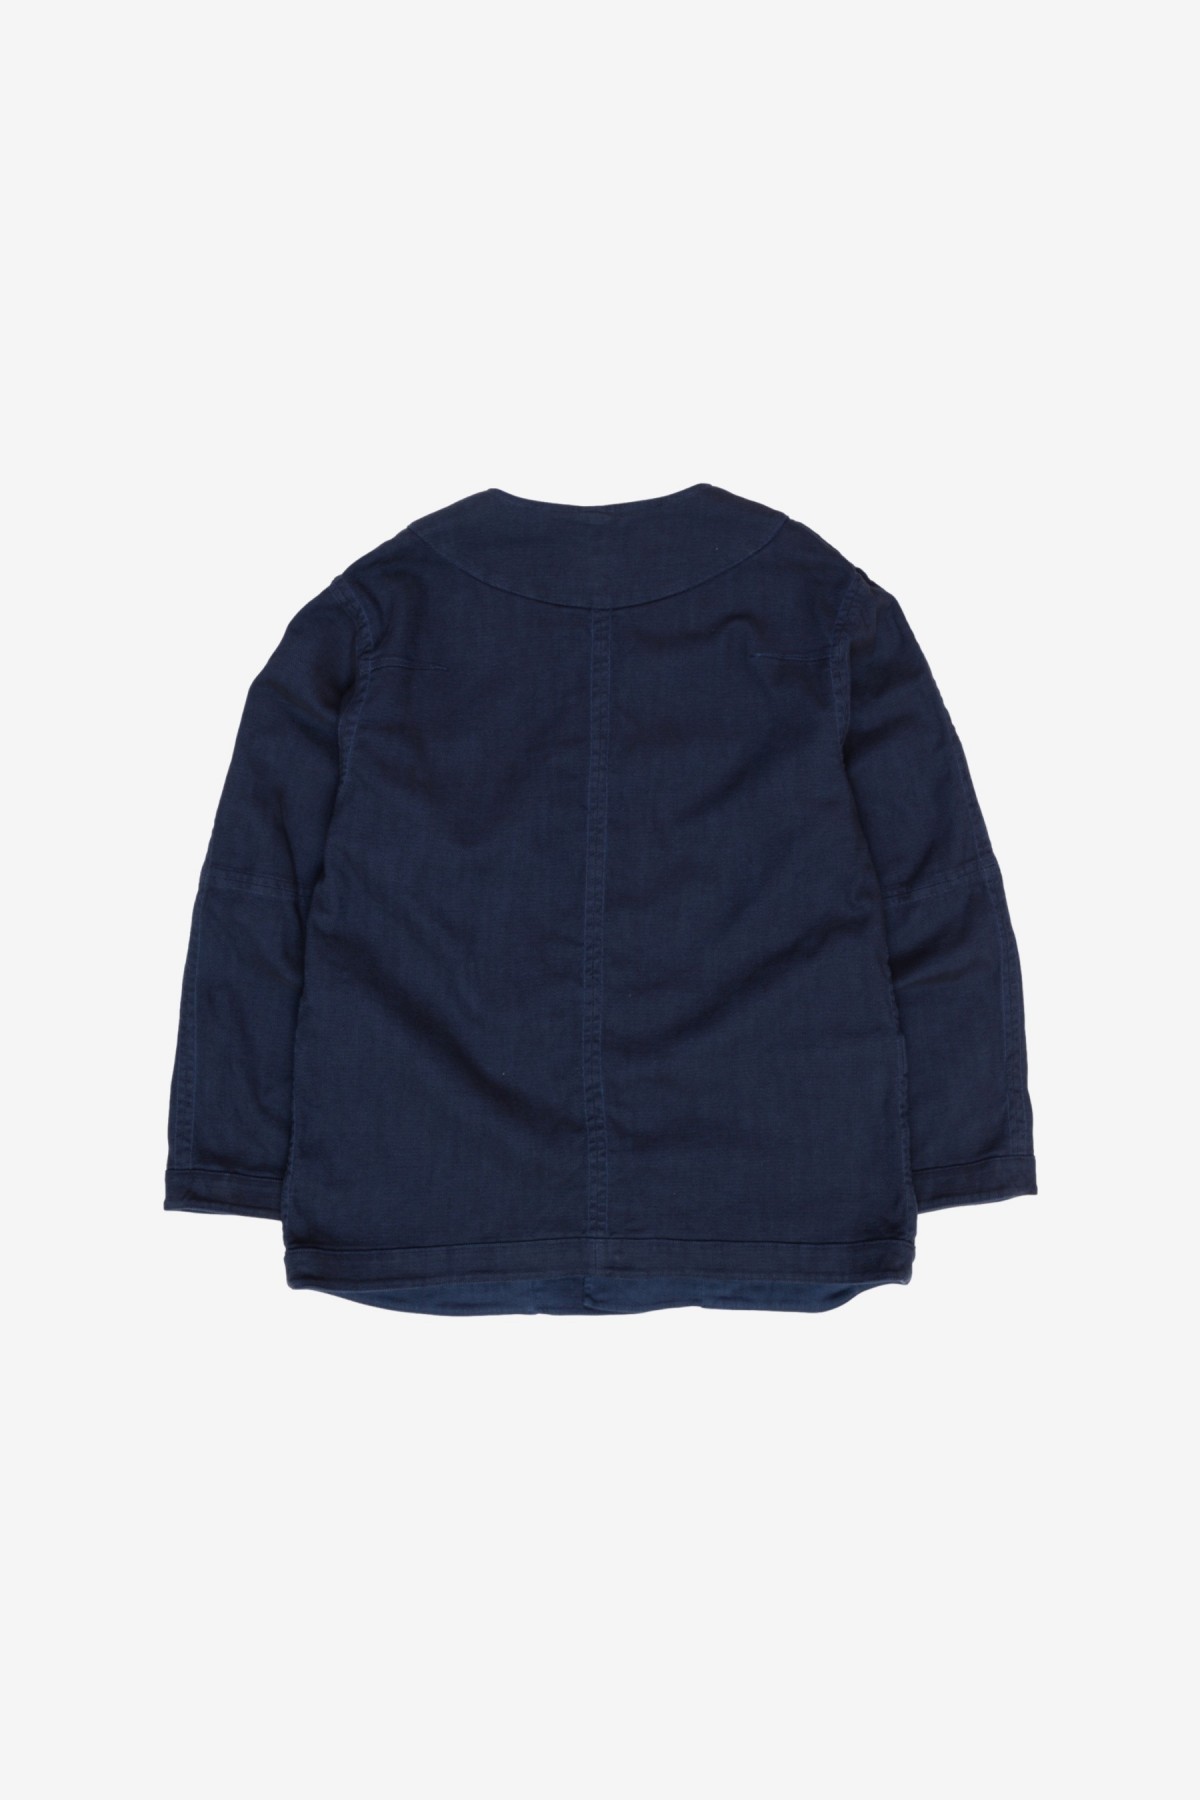 ts(s) Garment Dye Cotton Heavy Oxford Stretch Cloth Reversible Seam Taping Collarless Jacket in Navy